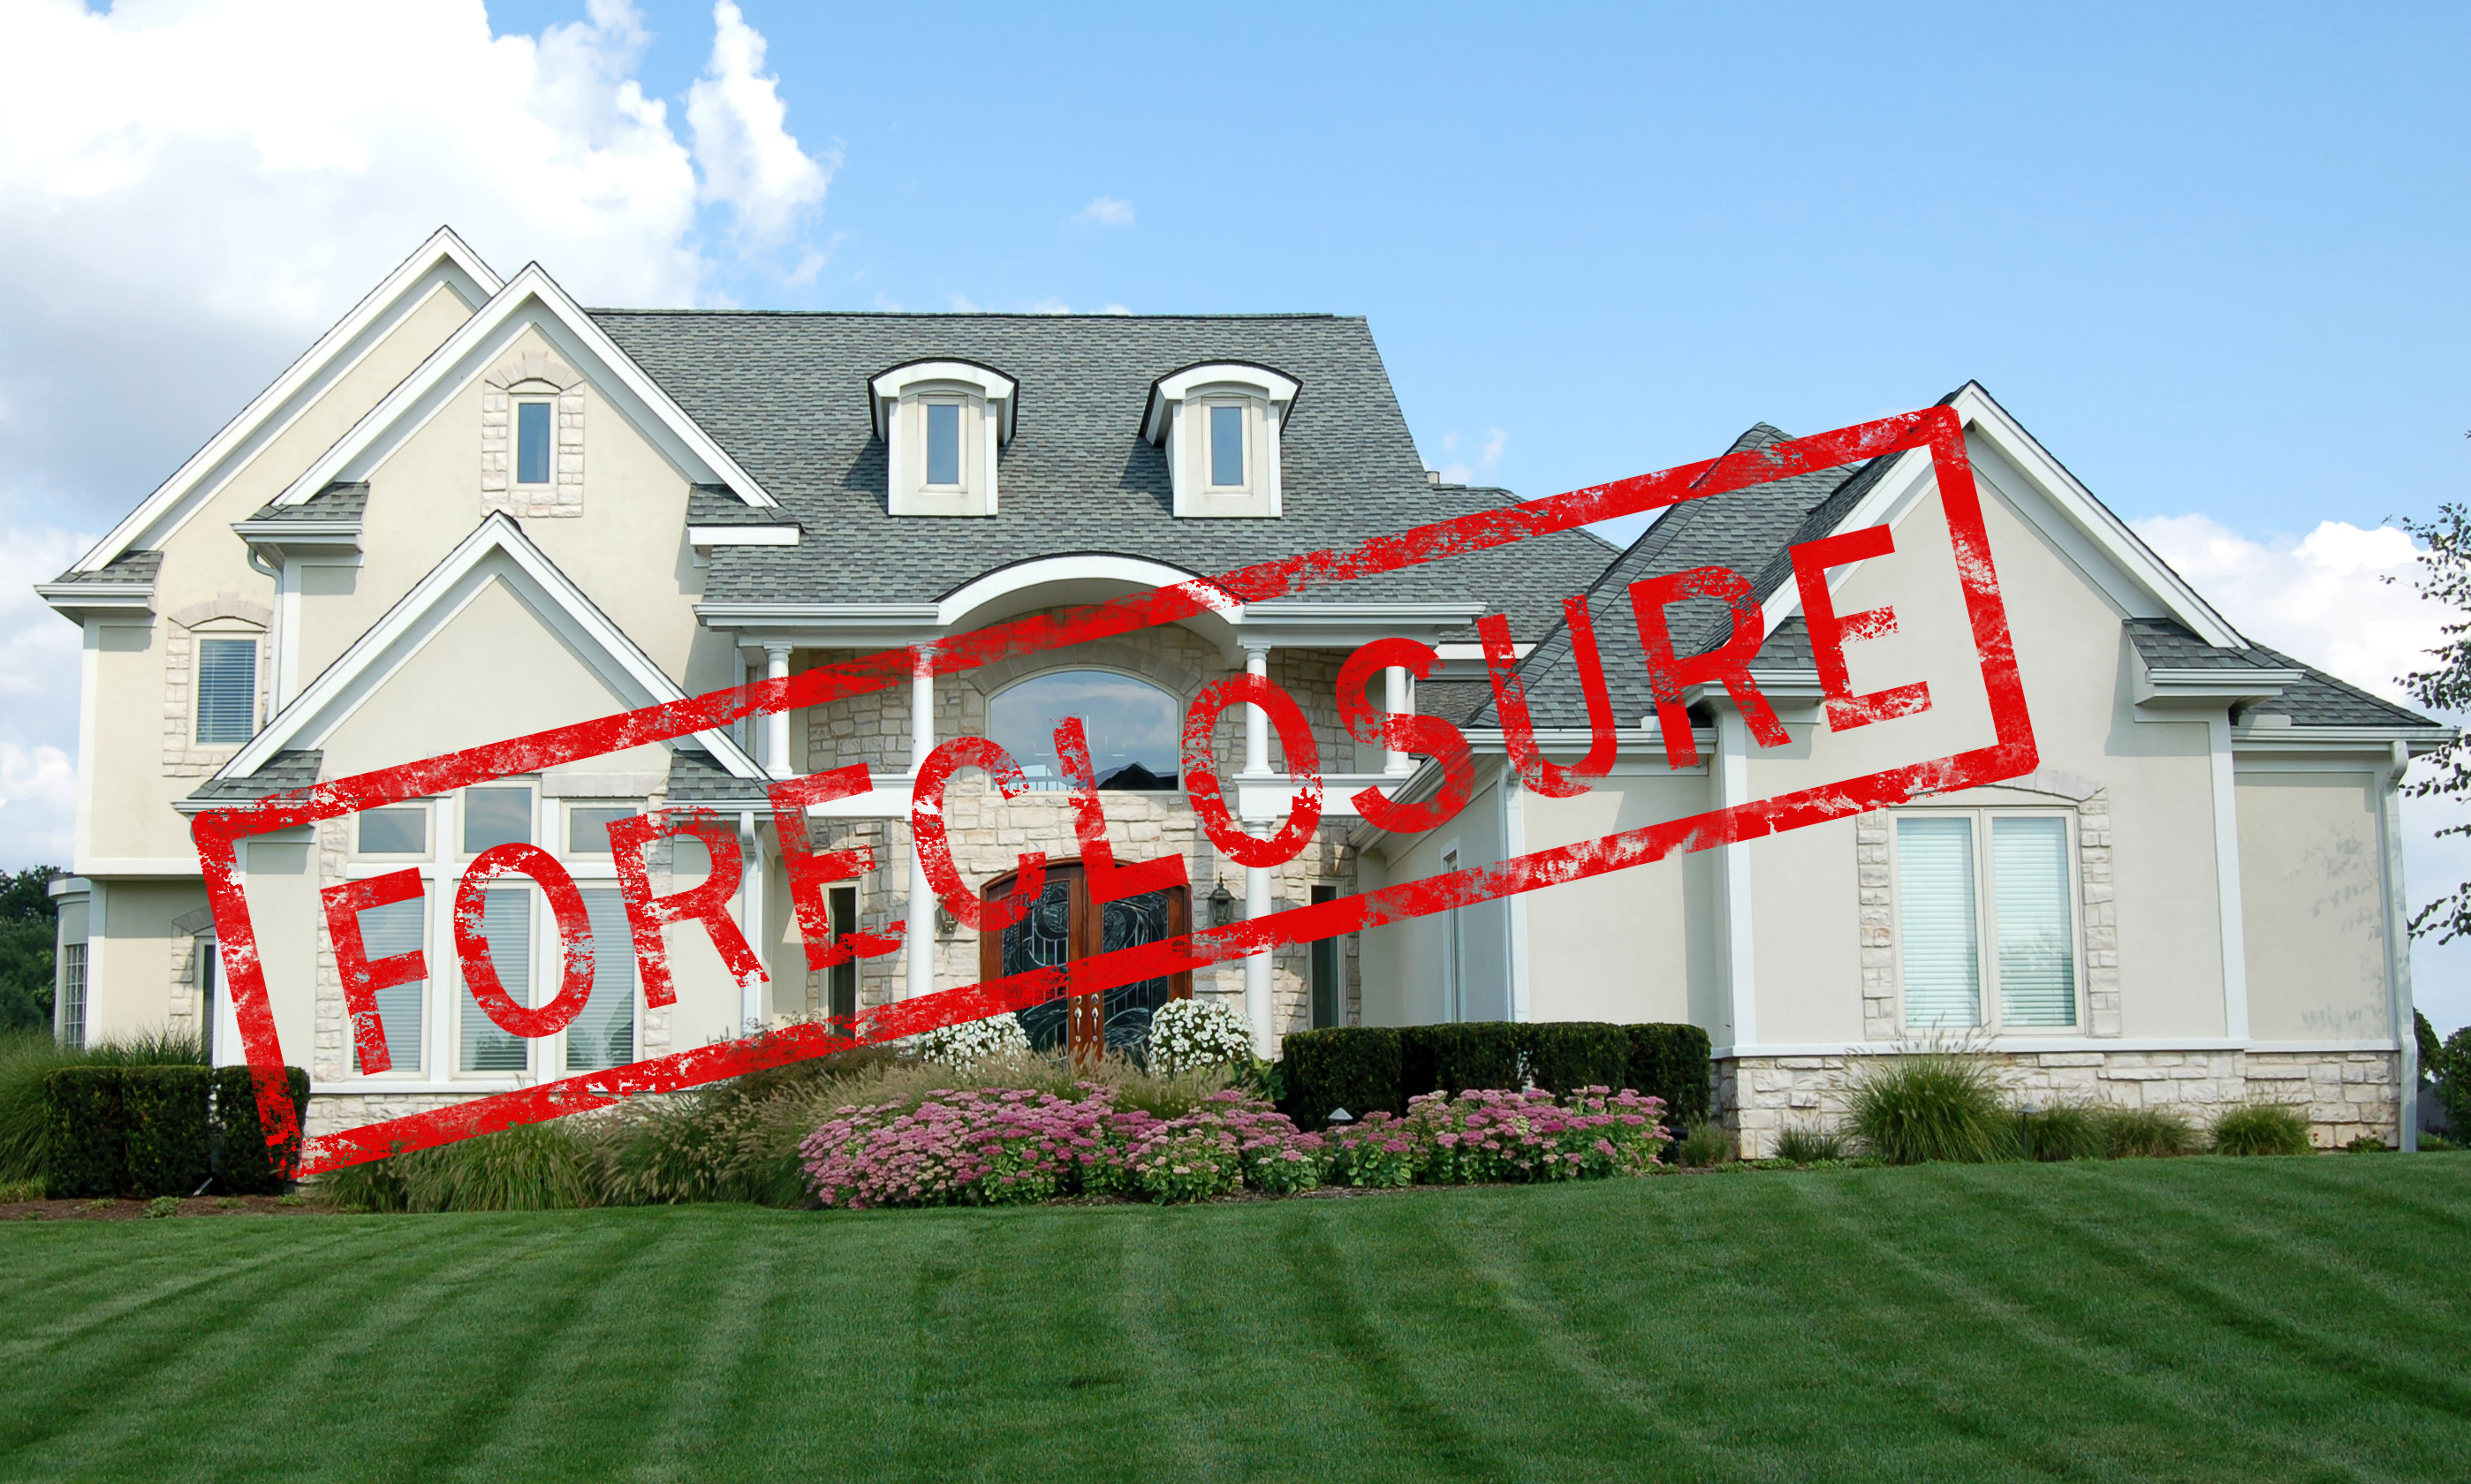 Call Appraisals United to order appraisals pertaining to Haralson foreclosures